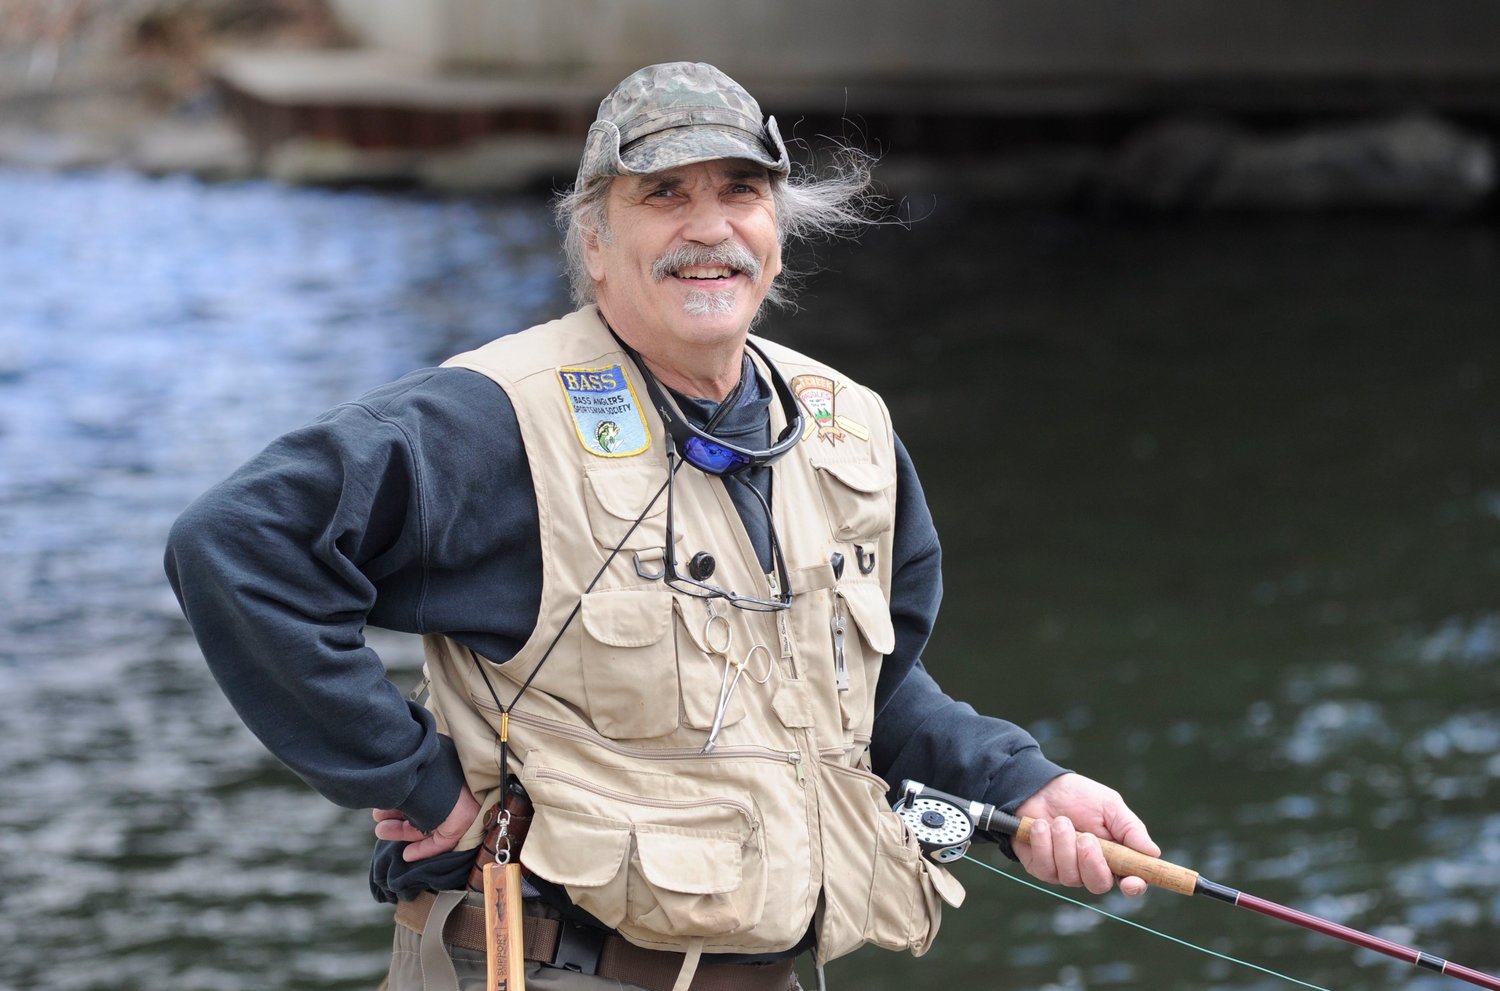 Robert Scherer of Roscoe, NY has fished Junction Pool for 35 years.